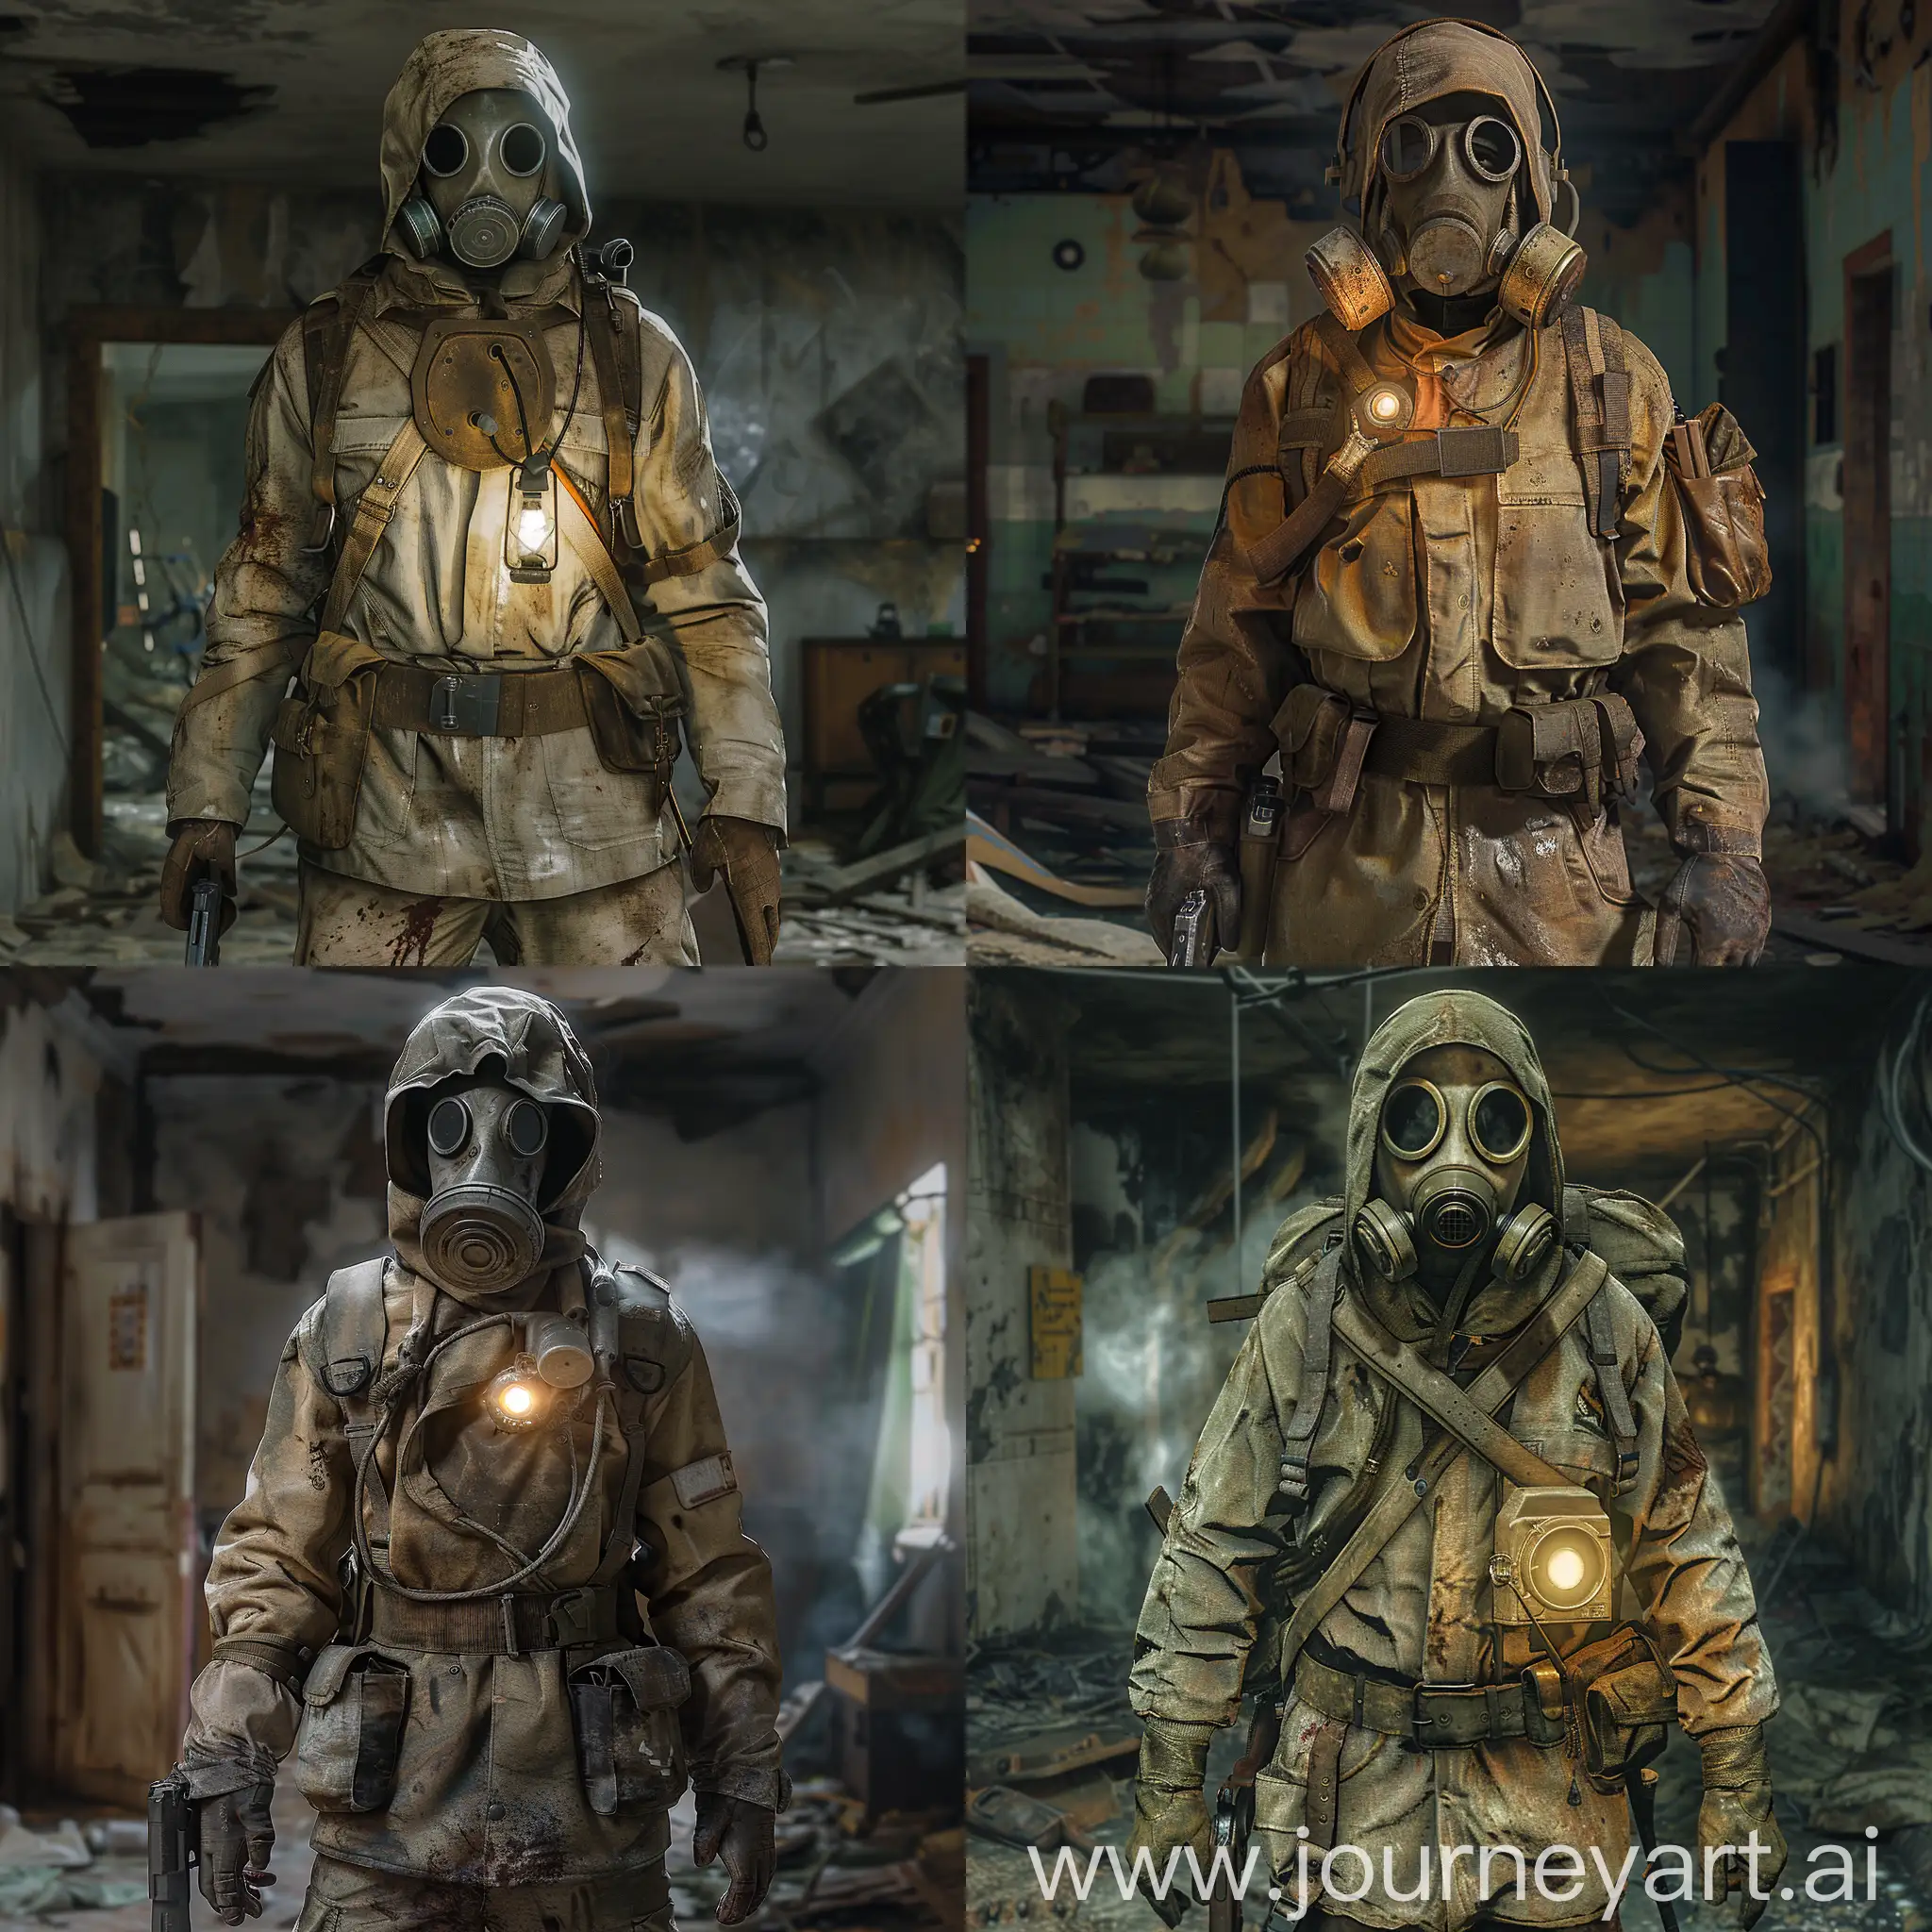 The stalker is a lone newcomer, a gas mask, a dirty light brown jacket, a Soviet belt, a small backpack on his back, a light military discharge on his body, a chest lamp, a pistol in one hand, the stalker stands in a random location from the game STALKER Shadow of Chernobyl.